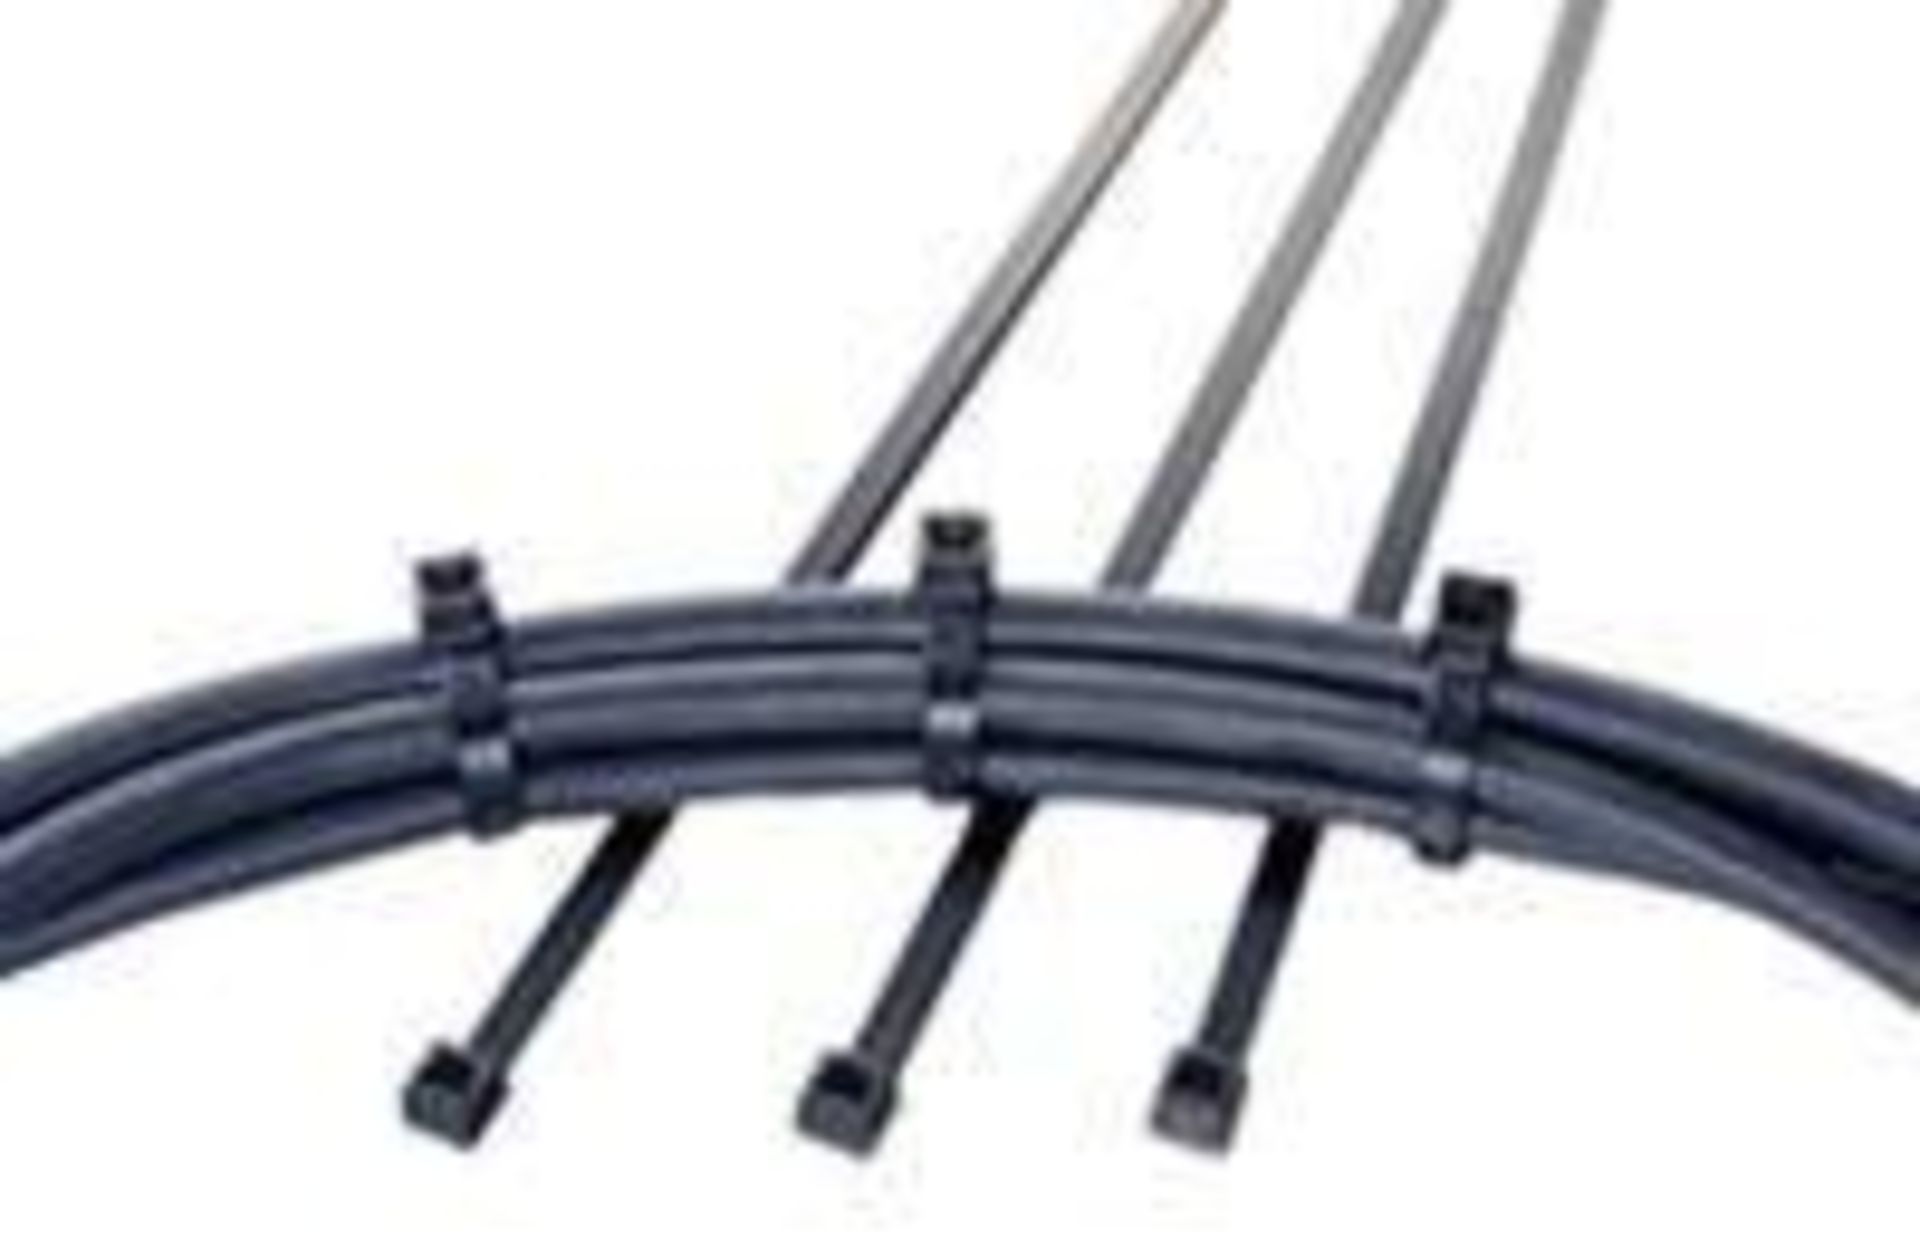 1,000 x Hellermann Tyton Black Nylon Non Releasable Cable Ties - 270mm x 4.6mm - LK Series - CL011 - - Image 4 of 4